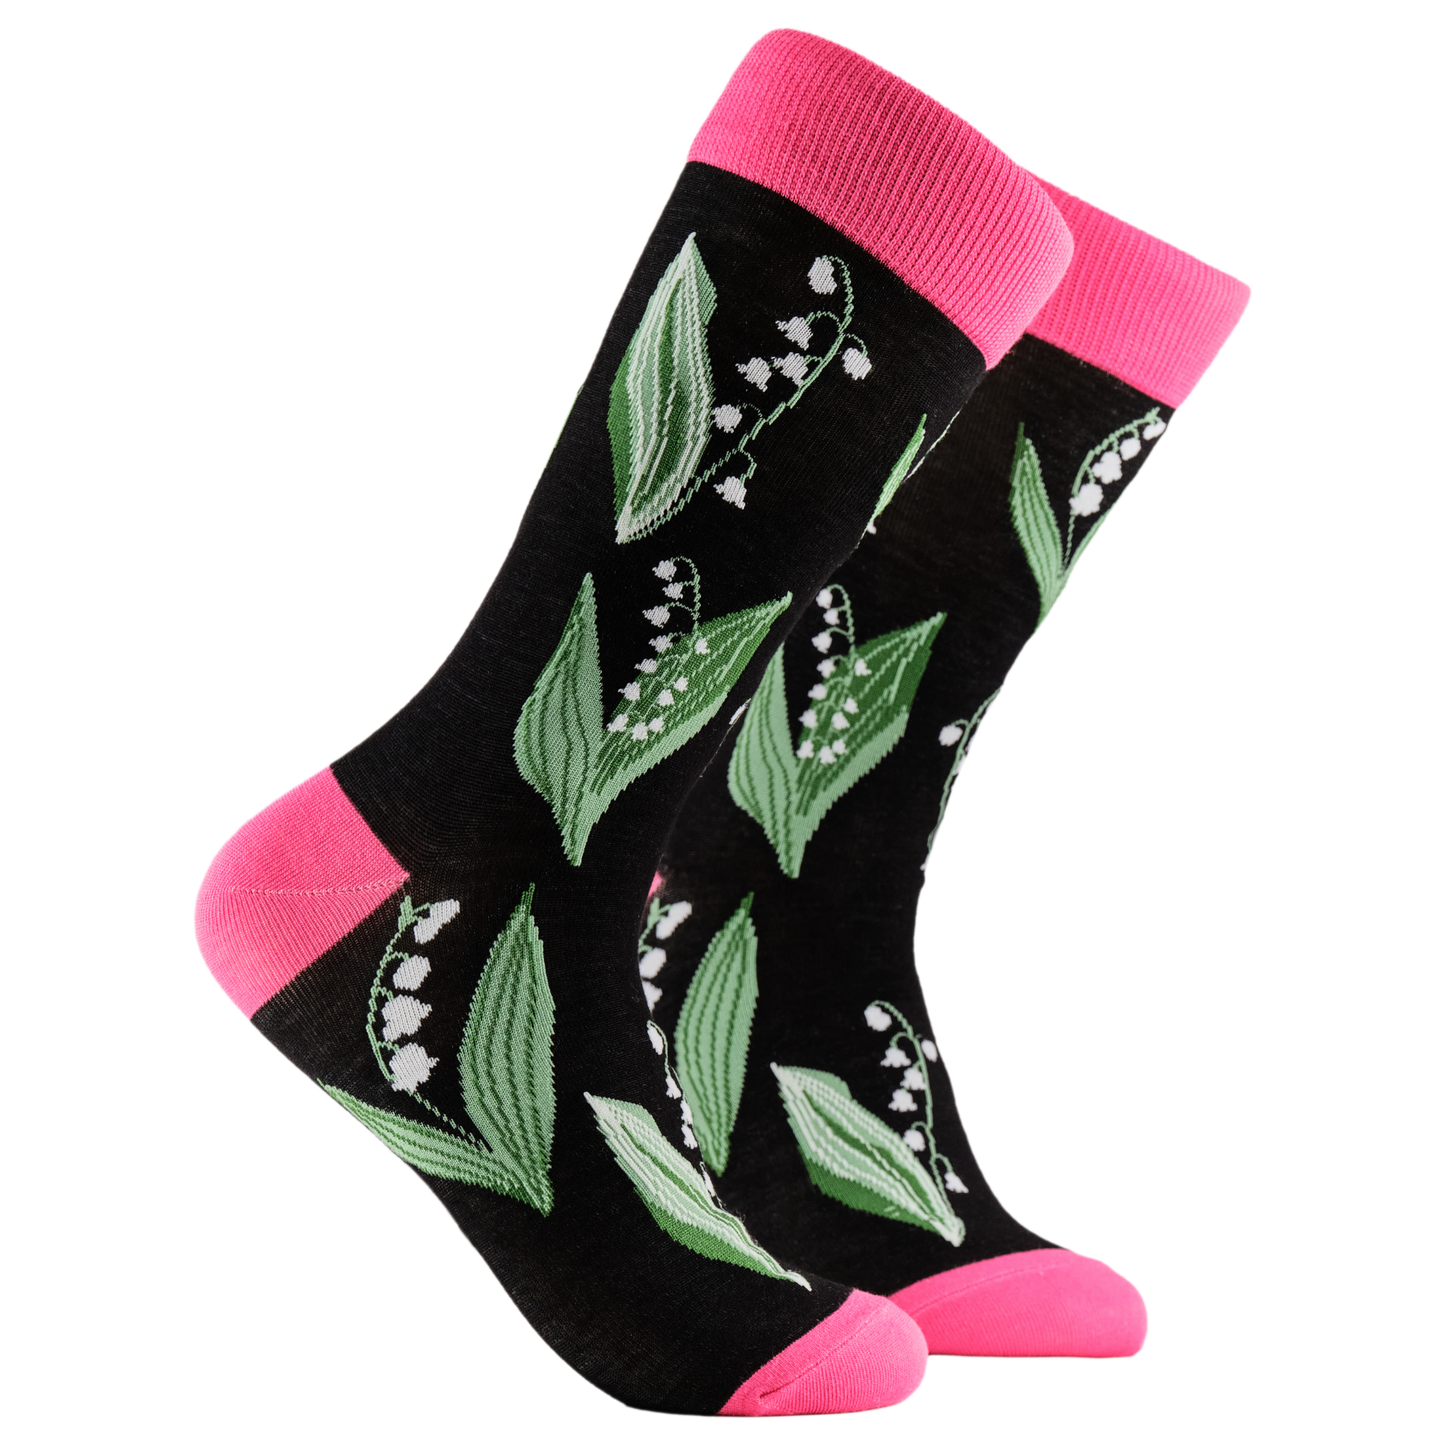 Lily of the Morning Valley Floral Bamboo Socks.  A pair of socks depicting Lilly of the Morning flowers. Black legs, pink cuff, heel and toe.